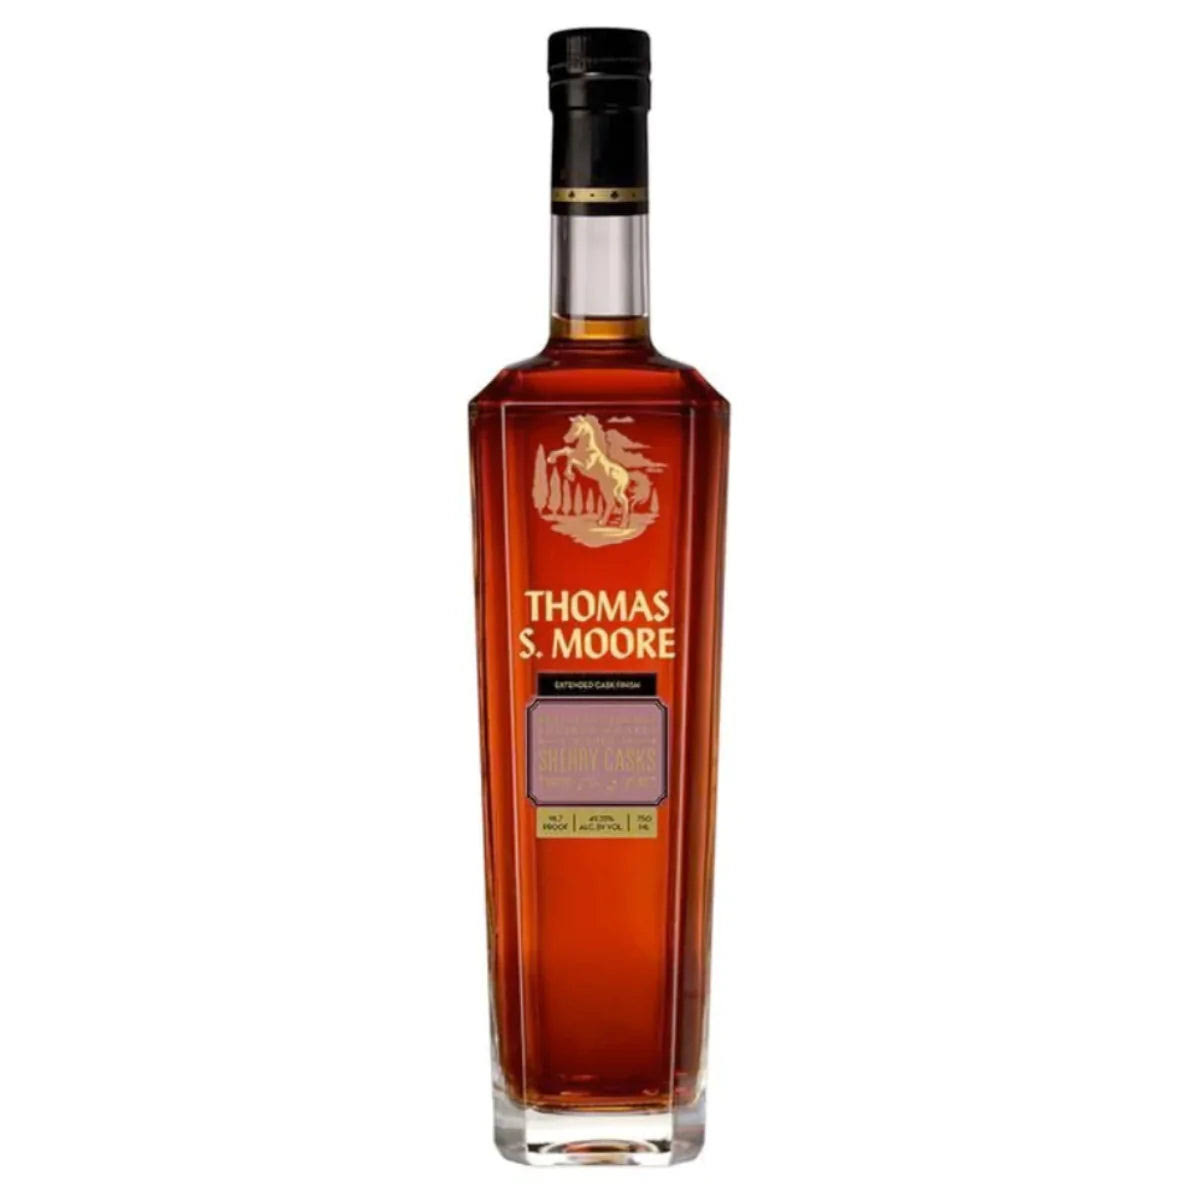 Thomas S Moore Sherry Cask Finished Straight Bourbon Whiskey 750ml